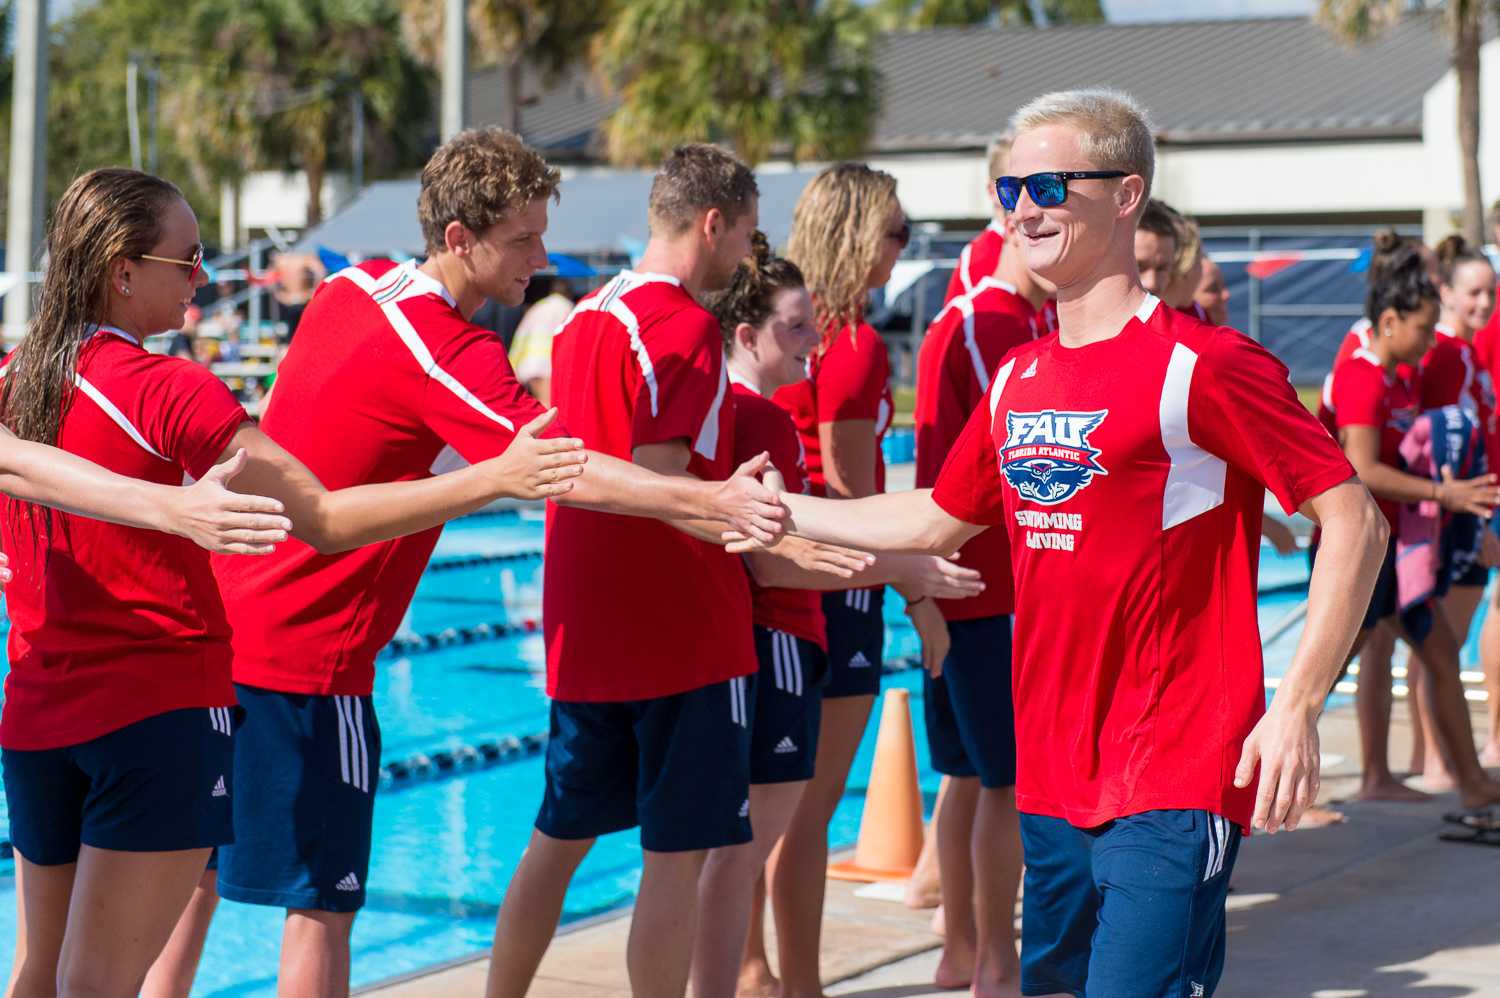 Team captain Richard Andrews (right) from FAU high-fives his teammates during the senior send-off ceremony prior to the start of the meet.  Andrews won the men’s 200 freestyle with a time of 1:42.17.